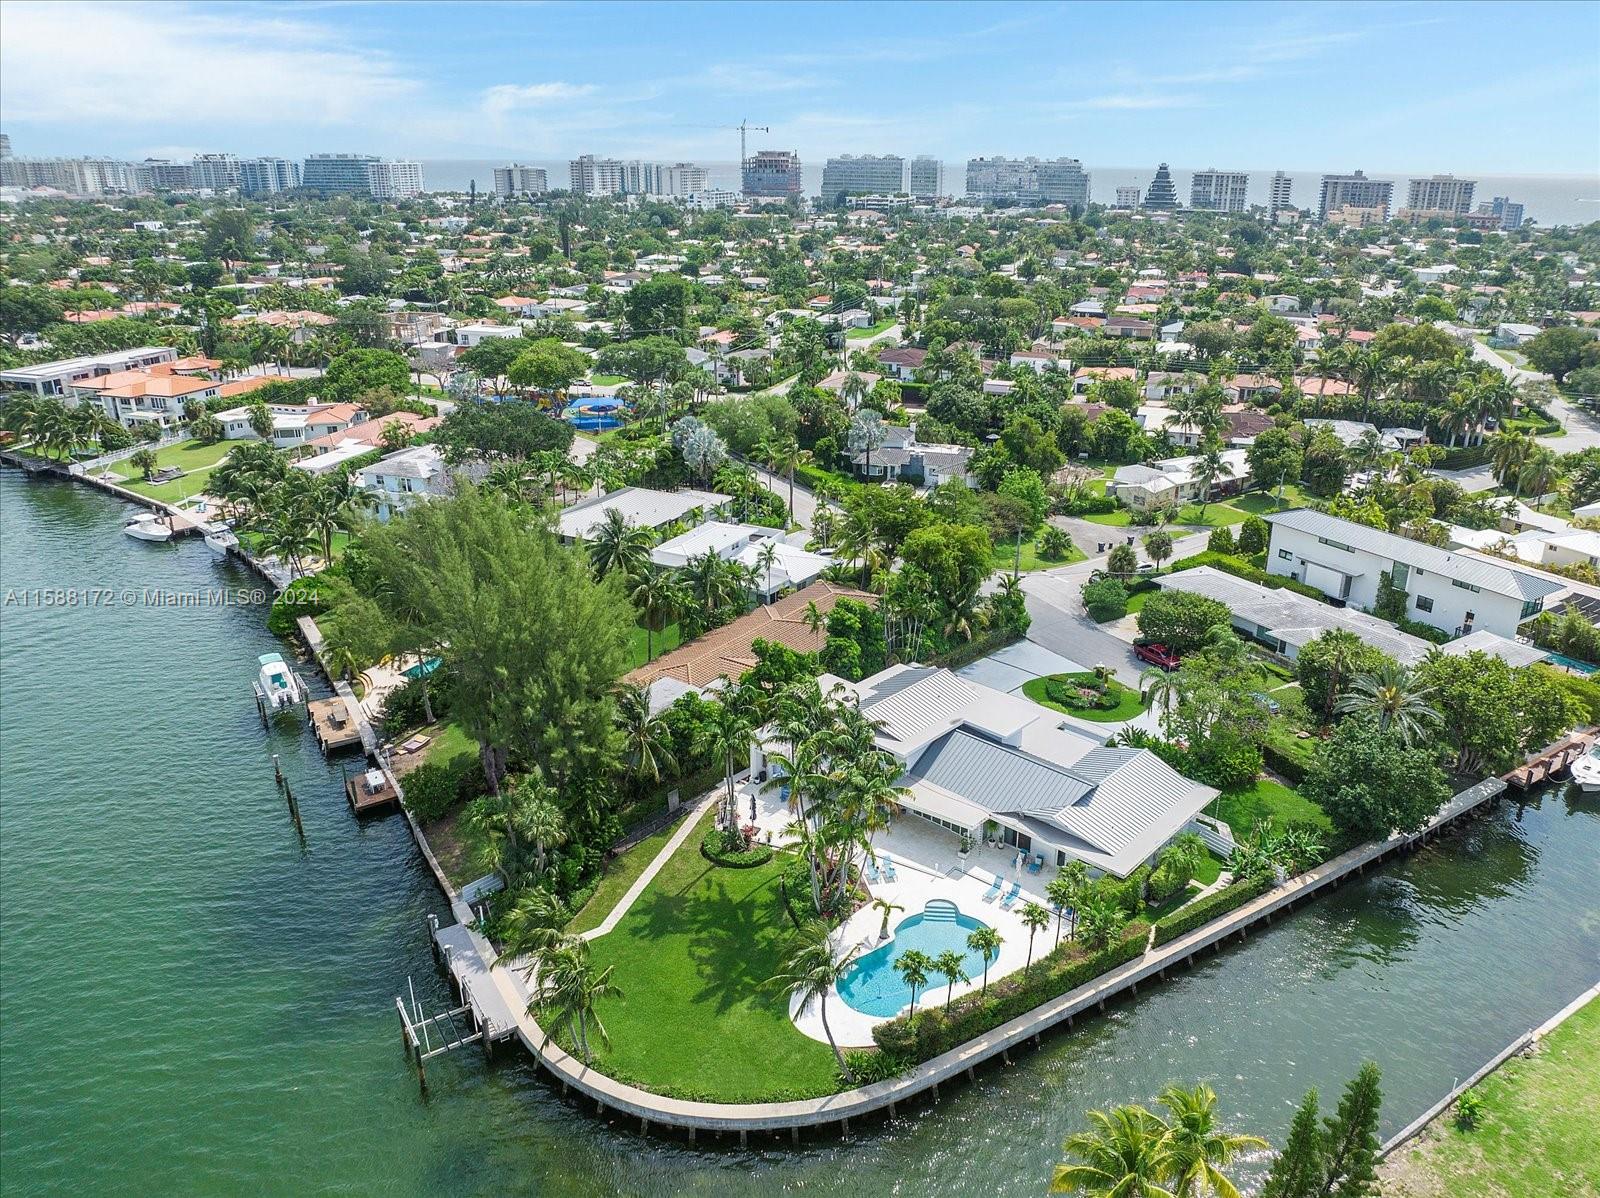 Don’t miss out on this rare opportunity to own a truly exceptional waterfront property in one of Miami’s most sought-after neighborhoods. This luxurious home boasts 6000+ sqft on a 20,800 sqft corner lot located at the end of Bay Dr. The property features modern and sophisticated finishes throughout including marble floors, high ceilings, and large windows that offer plenty of natural light and breathtaking views of the water. The open-concept living and dining areas are perfect for entertaining guests. The expansive master suite offers a private balcony overlooking the water. The property features a beautiful saltwater pool with a covered terrace and a private dock with direct bay access. 8900 Bay Dr. offers the ultimate South Florida lifestyle.